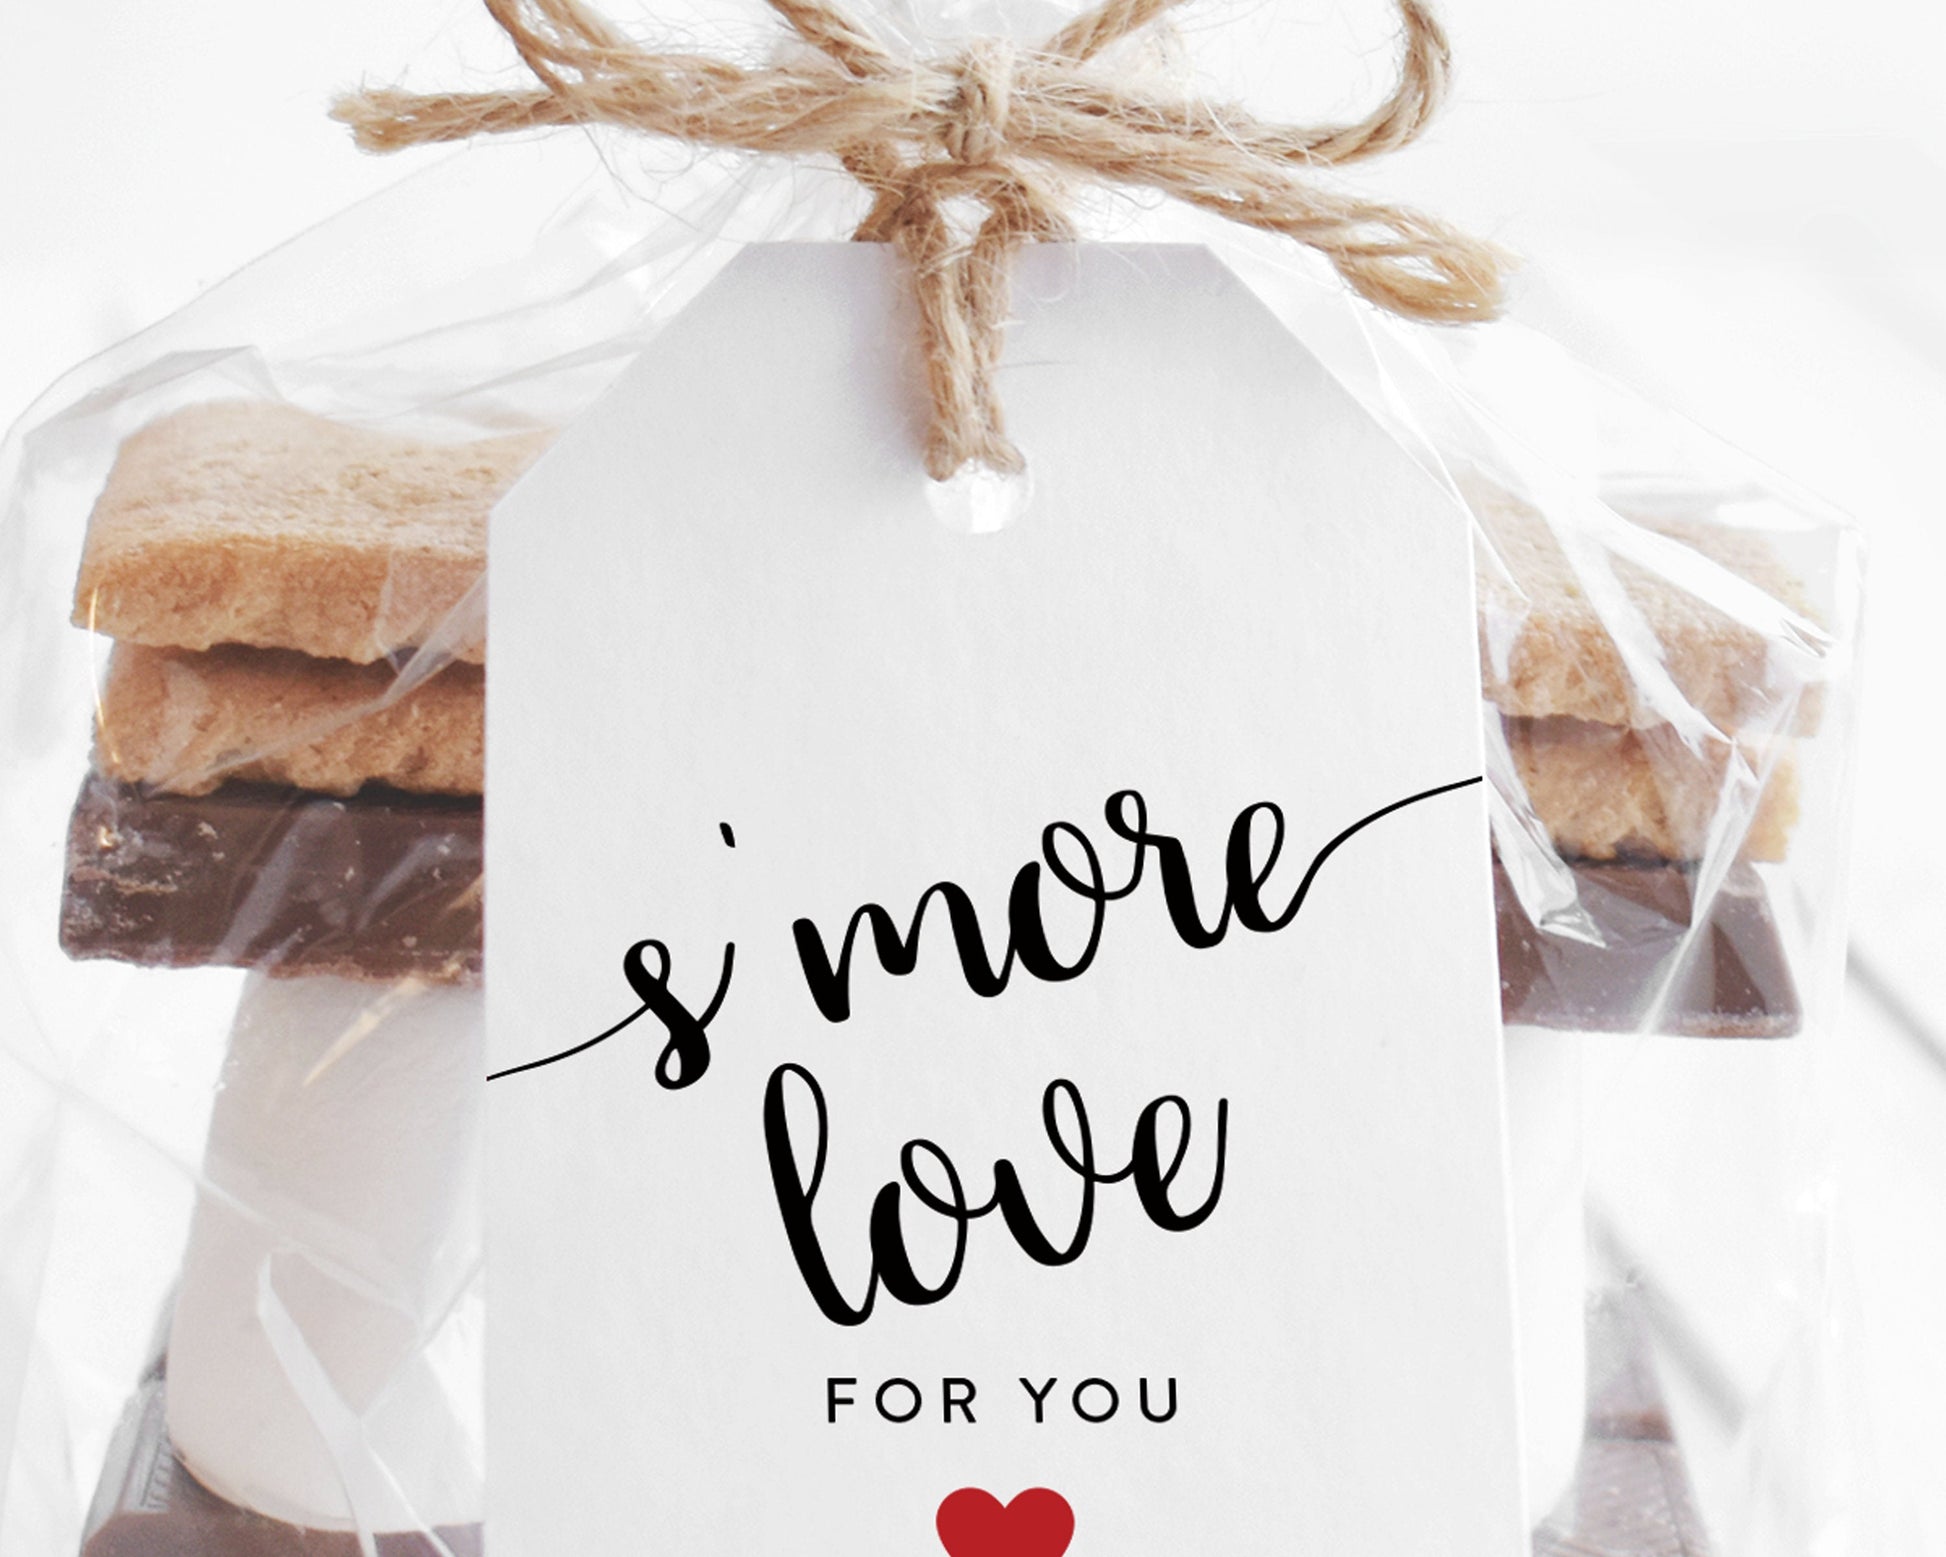 Close up of Lux Party’s white s’more love wedding favor tag with black script and a red heart, tied to a clear favor bag of s’mores ingredients.